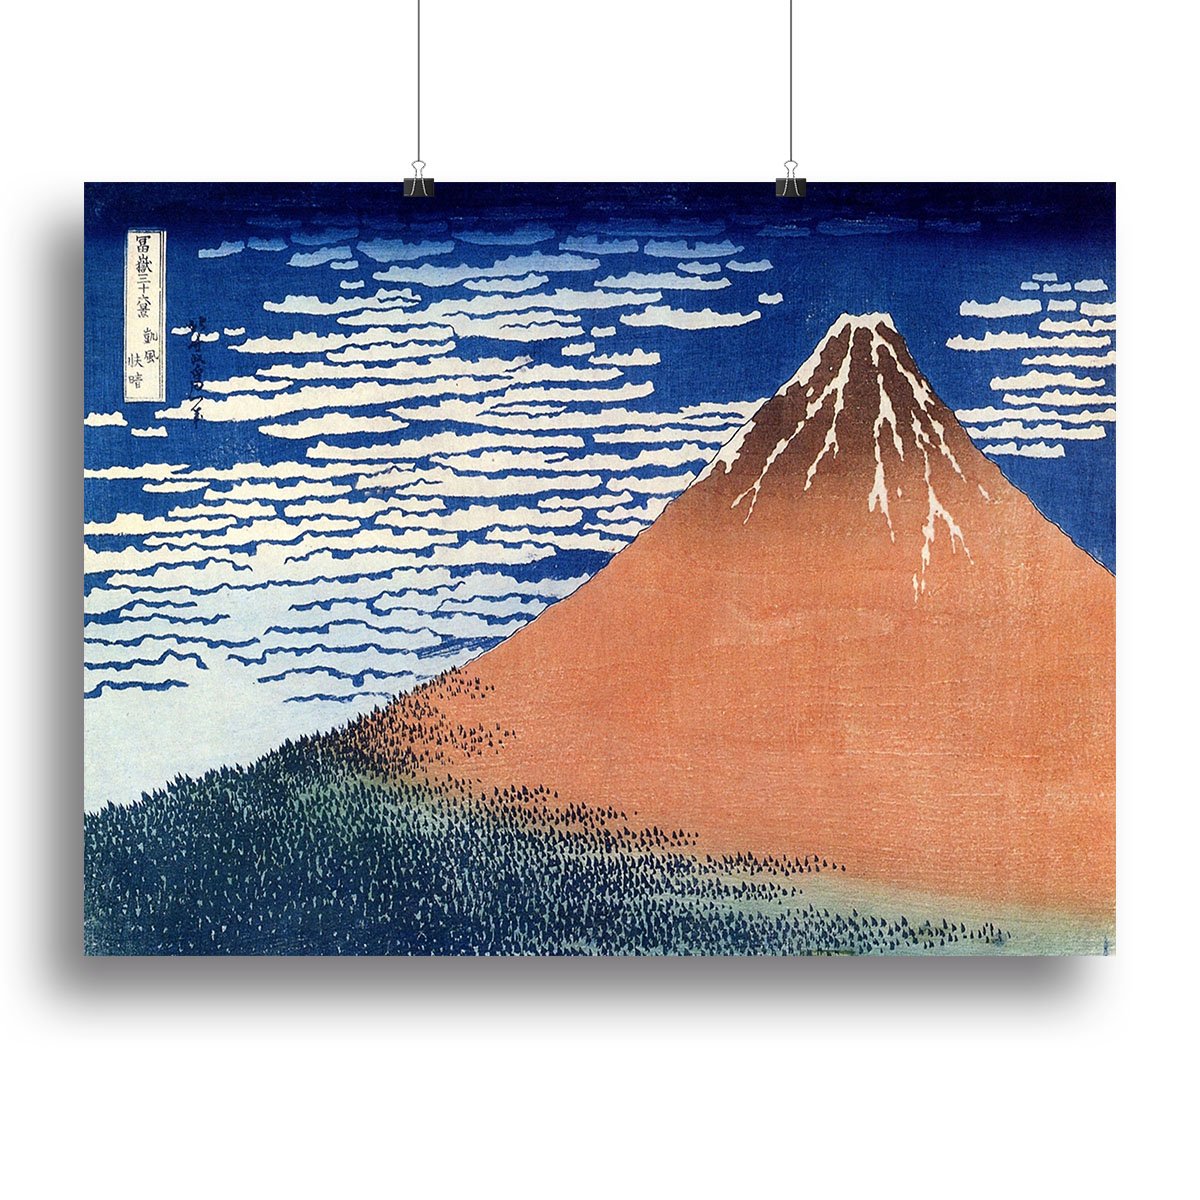 Mount Fuji by Hokusai Canvas Print or Poster